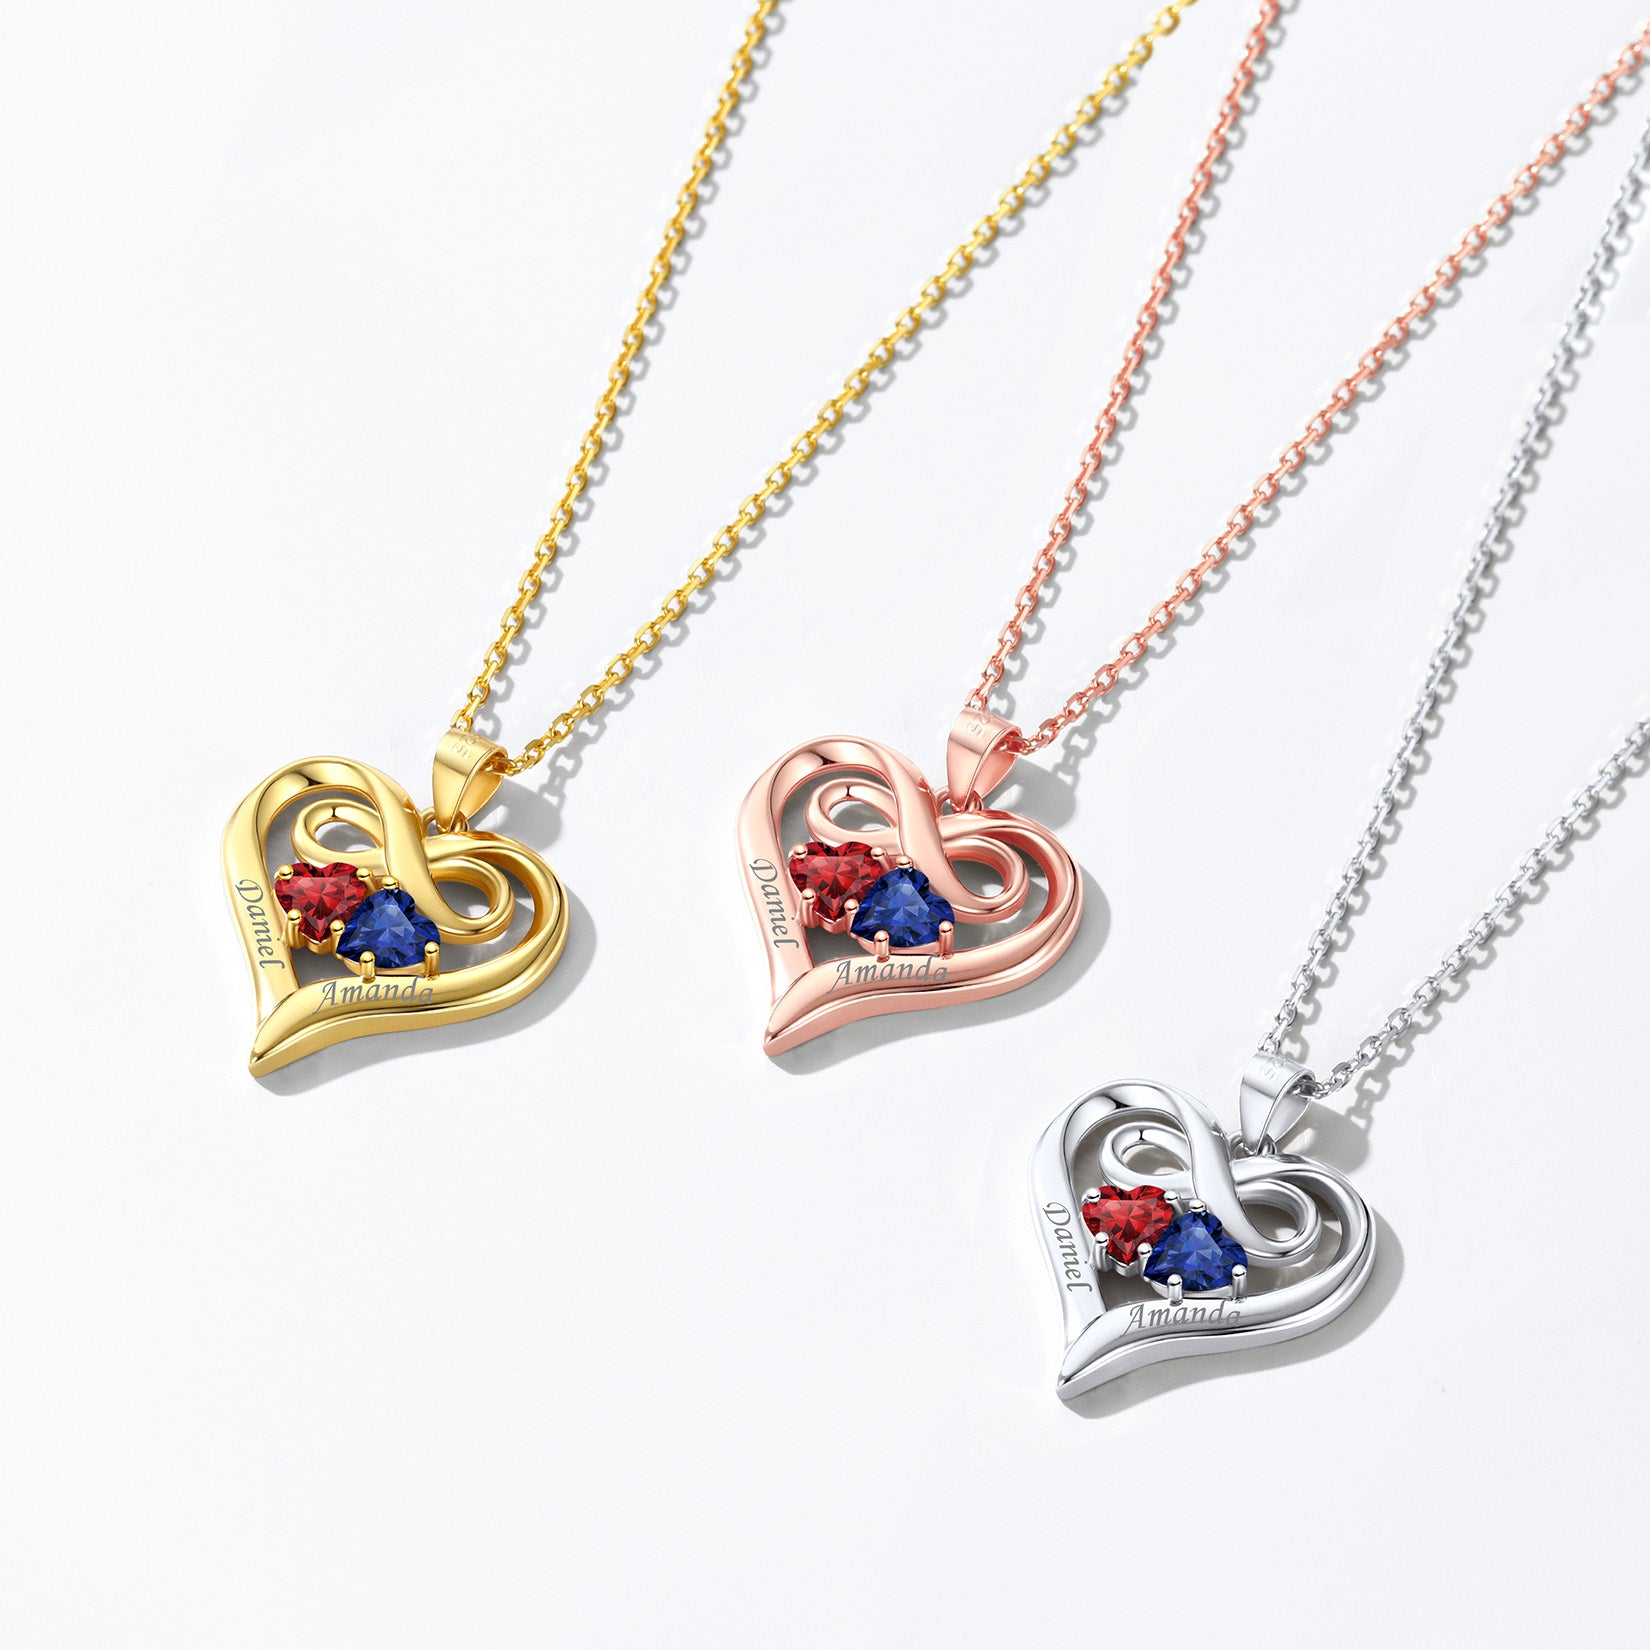 Two-Tone Sterling Silver Gemstone Birthstone Heart Pendant Necklace -  9022326 | HSN